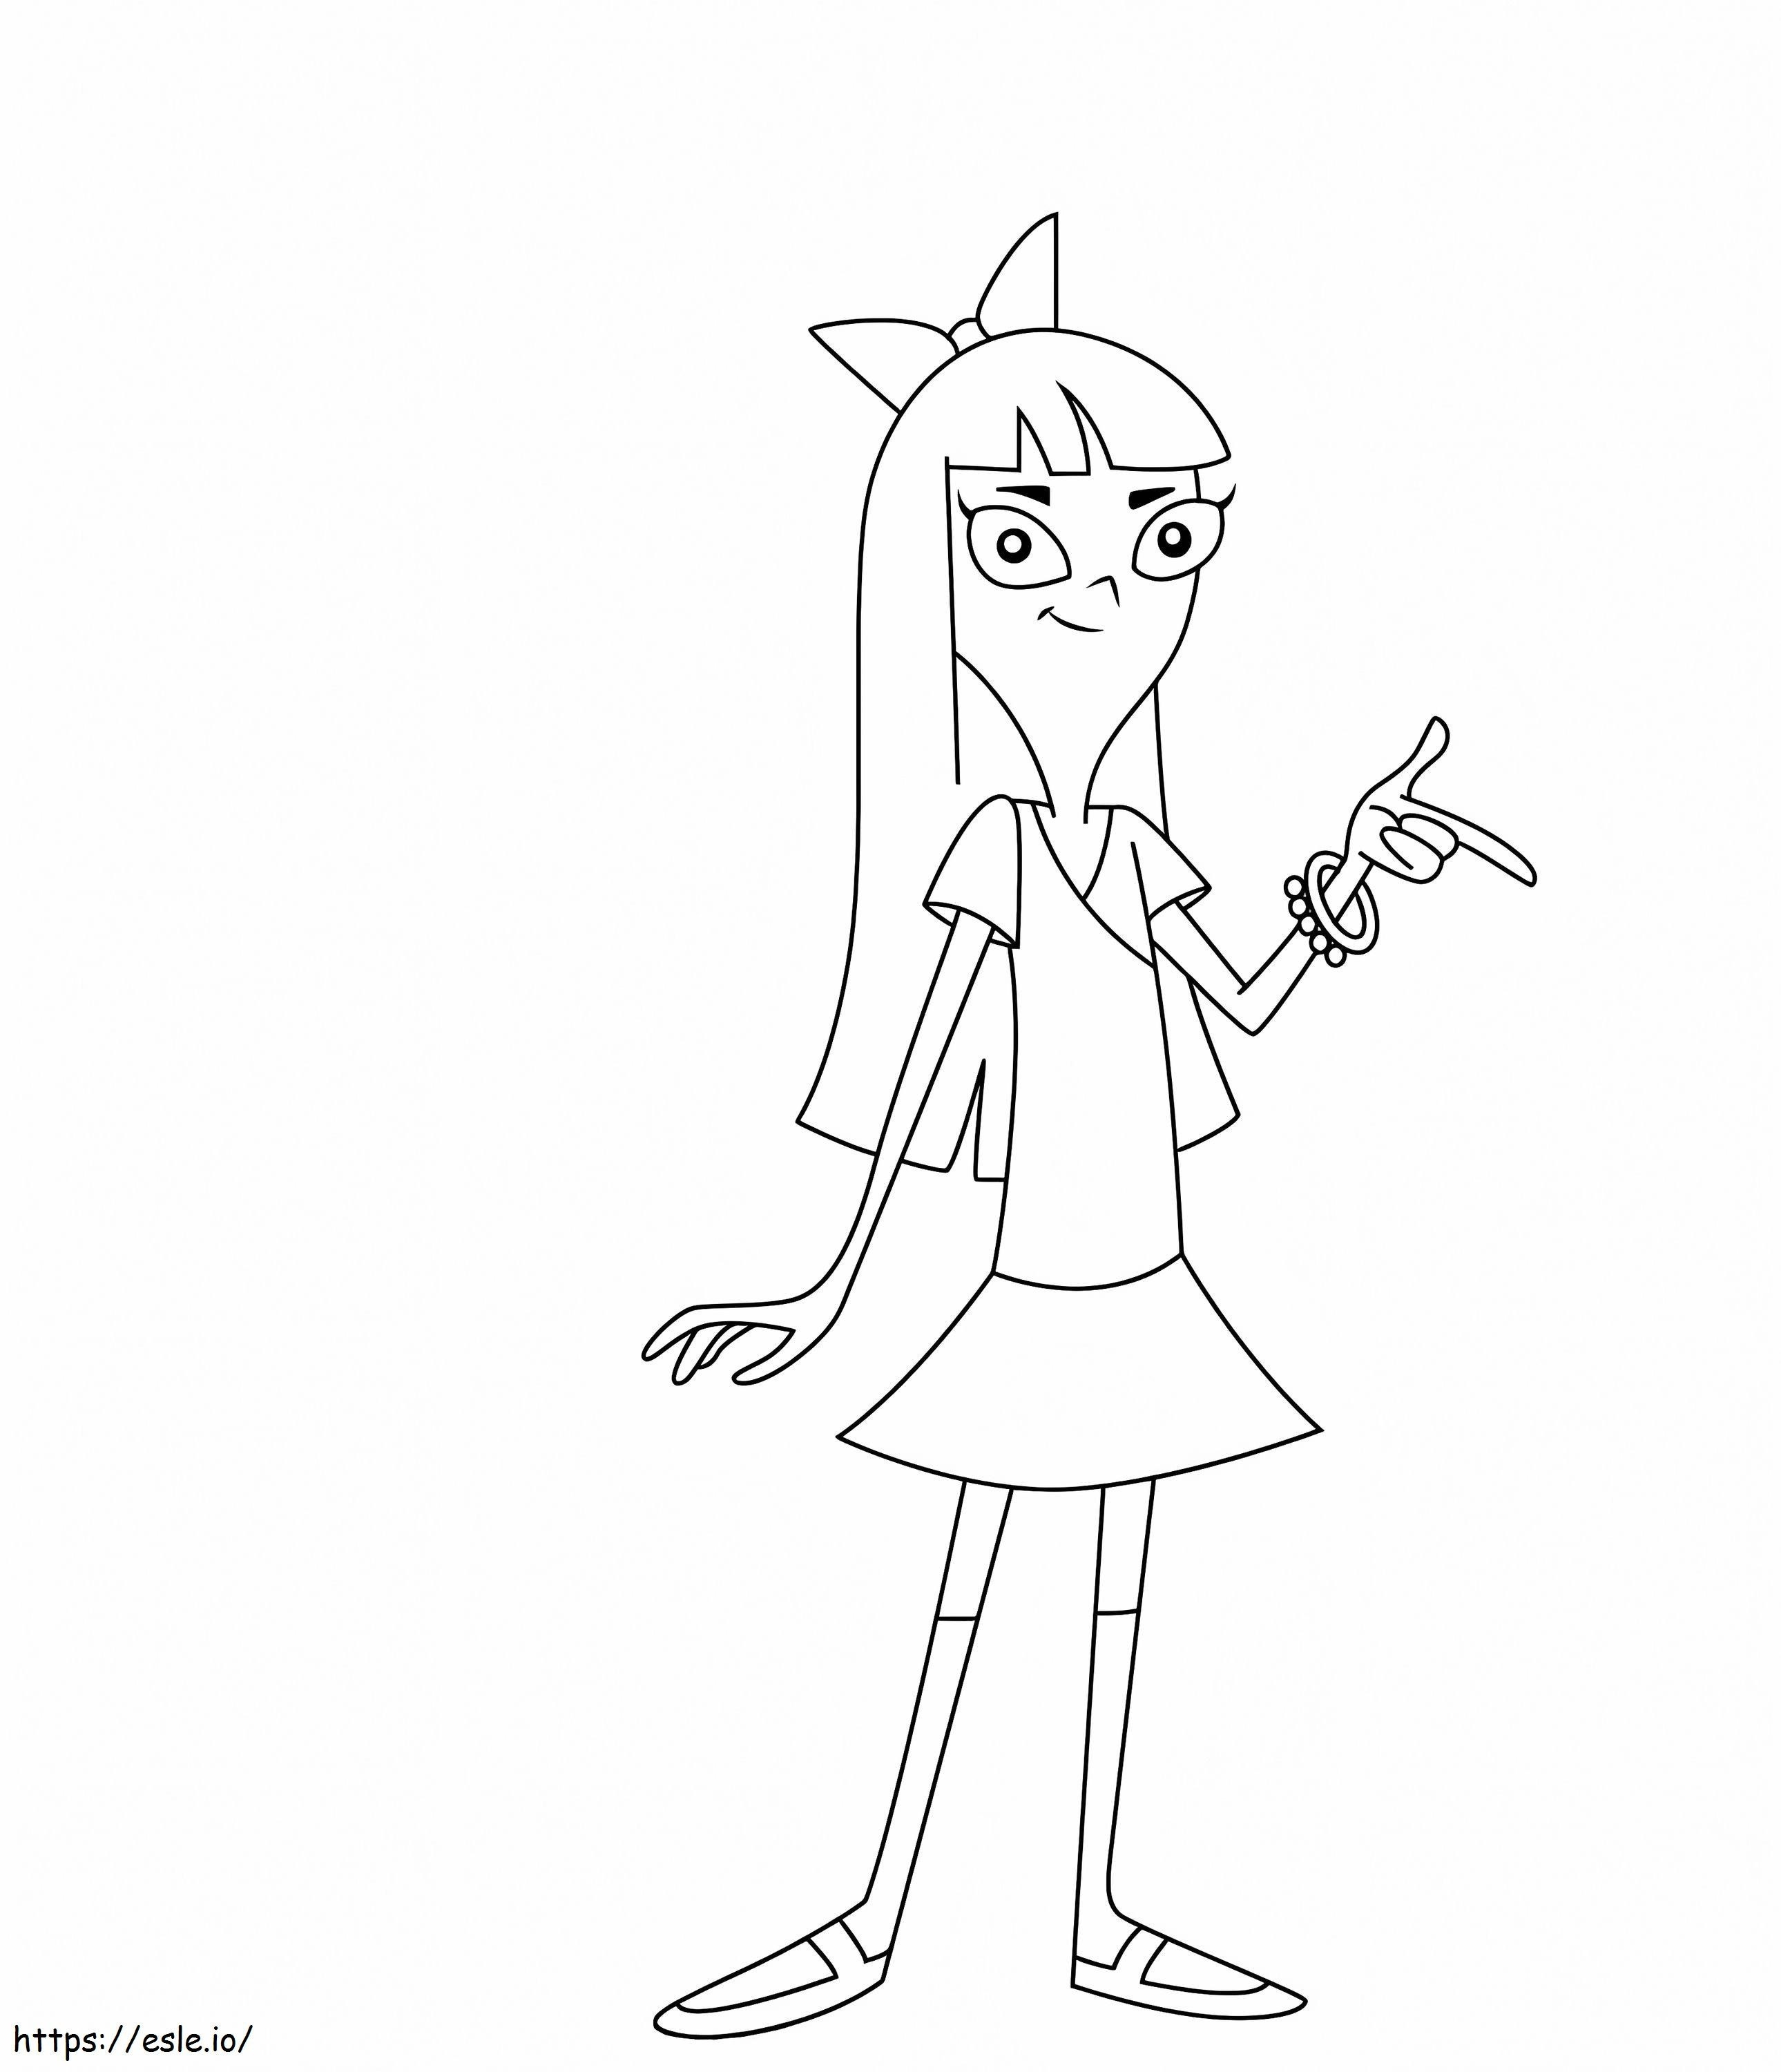 1559701002 Stacy Hirano From Phineas And Ferb A4 coloring page